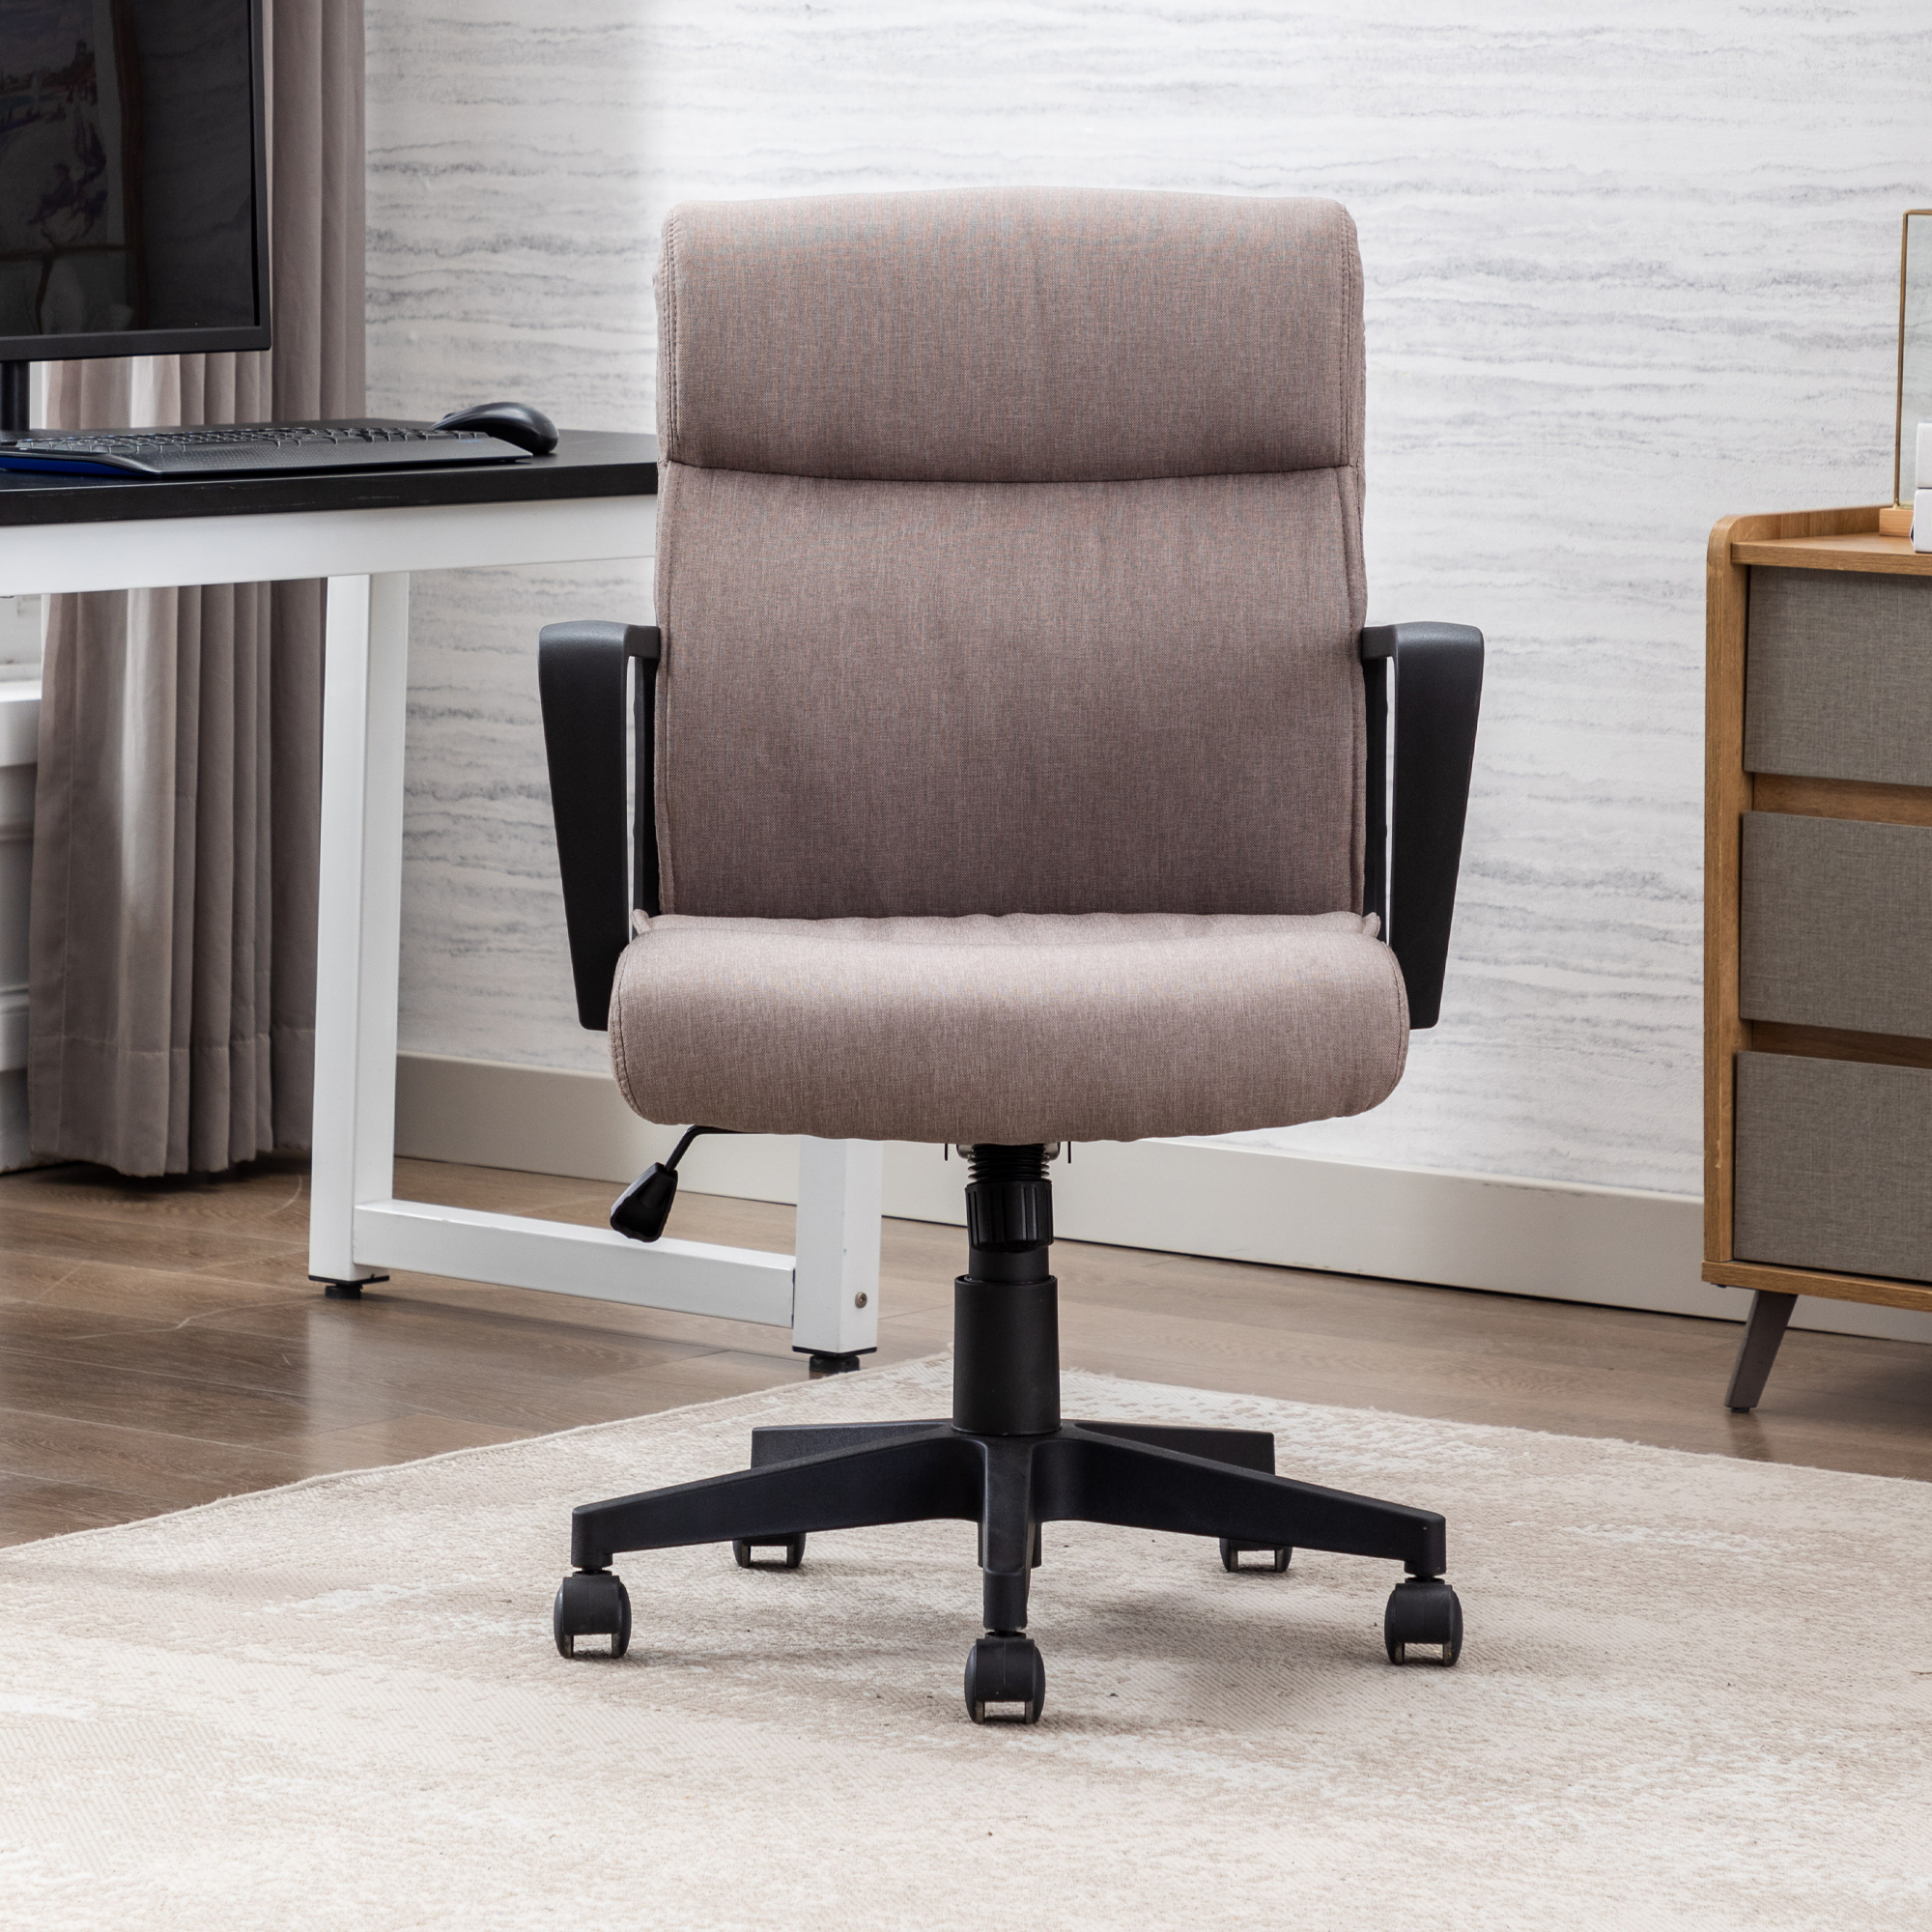 Hengming Home Office Chair Spring Cushion Mid Back Executive Desk Fabric Chair with PP Arms Leather 360 Swivel Task Chair-Boyel Living